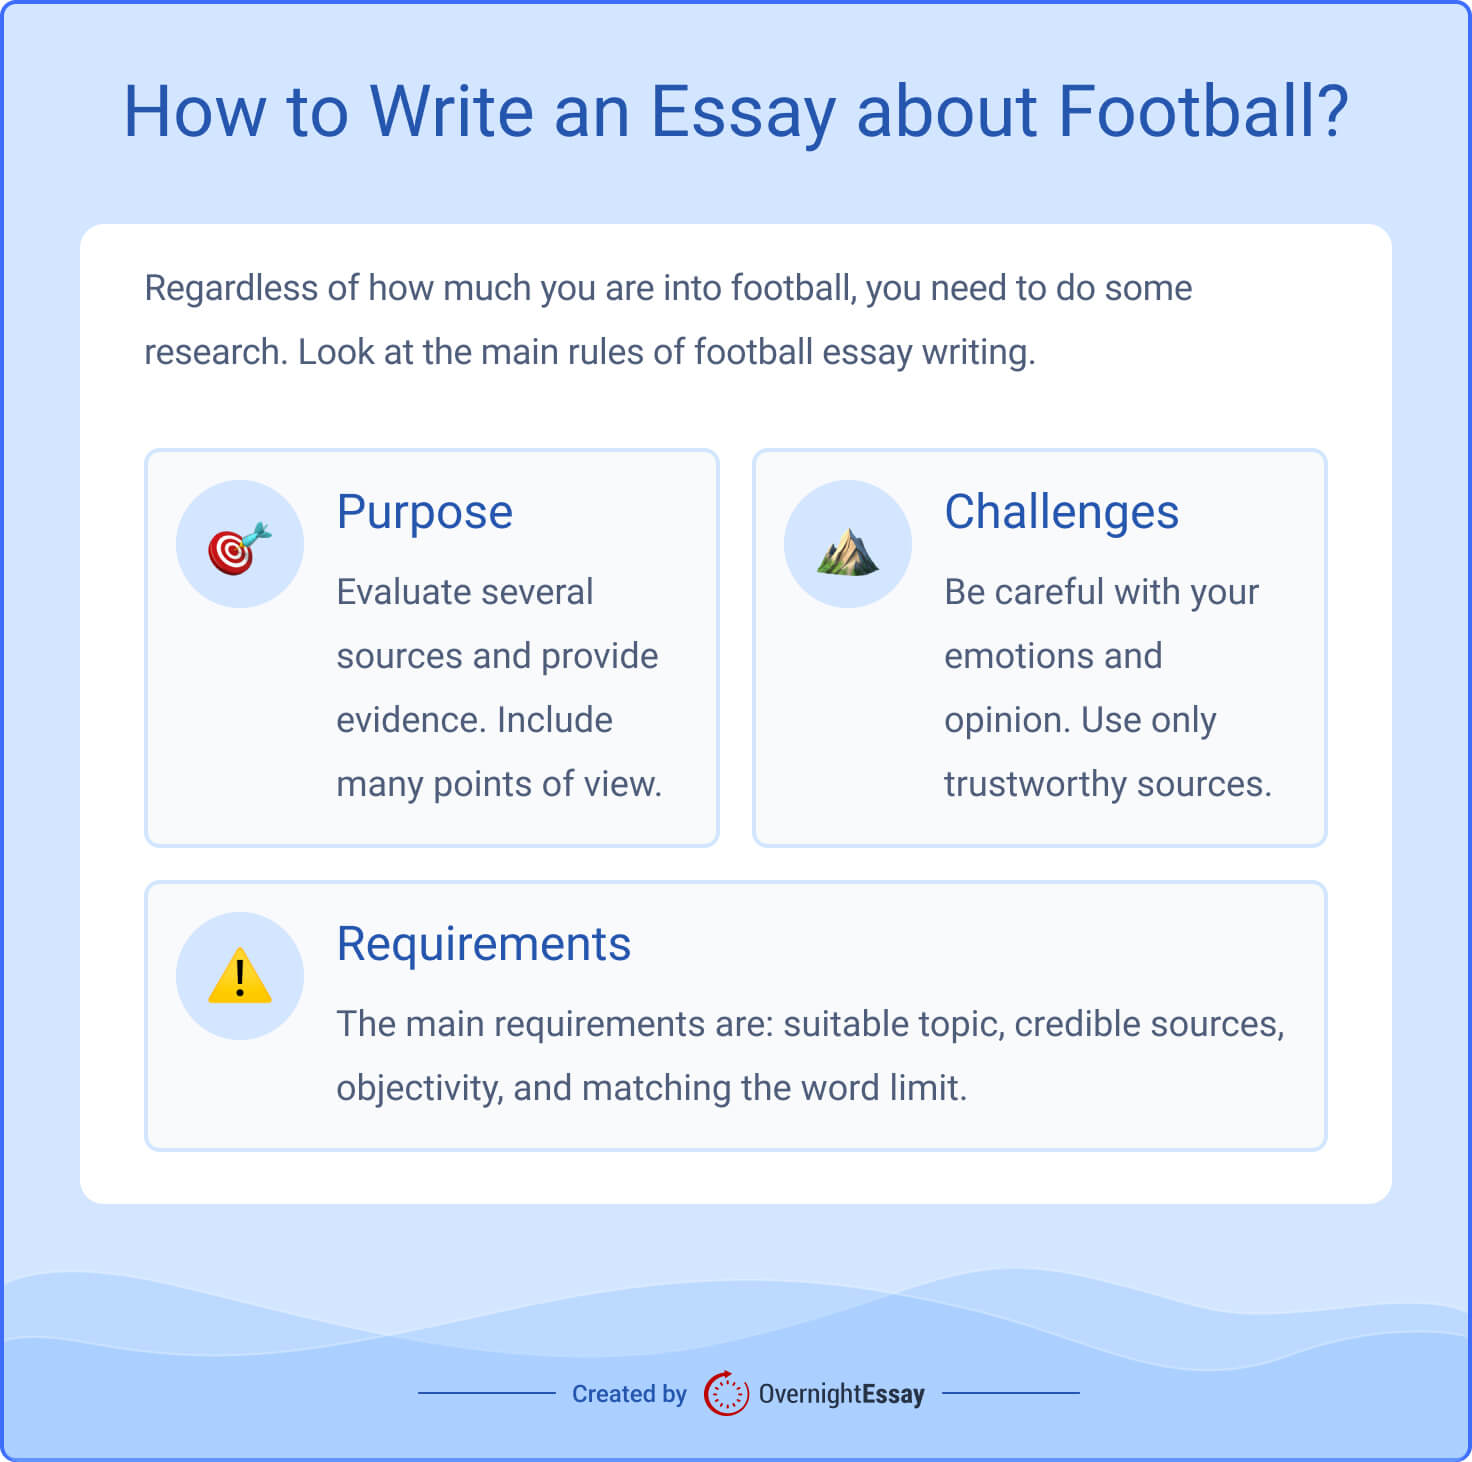 The picture provides information about the fundamental goals, challenges, and requirements of a football essay.